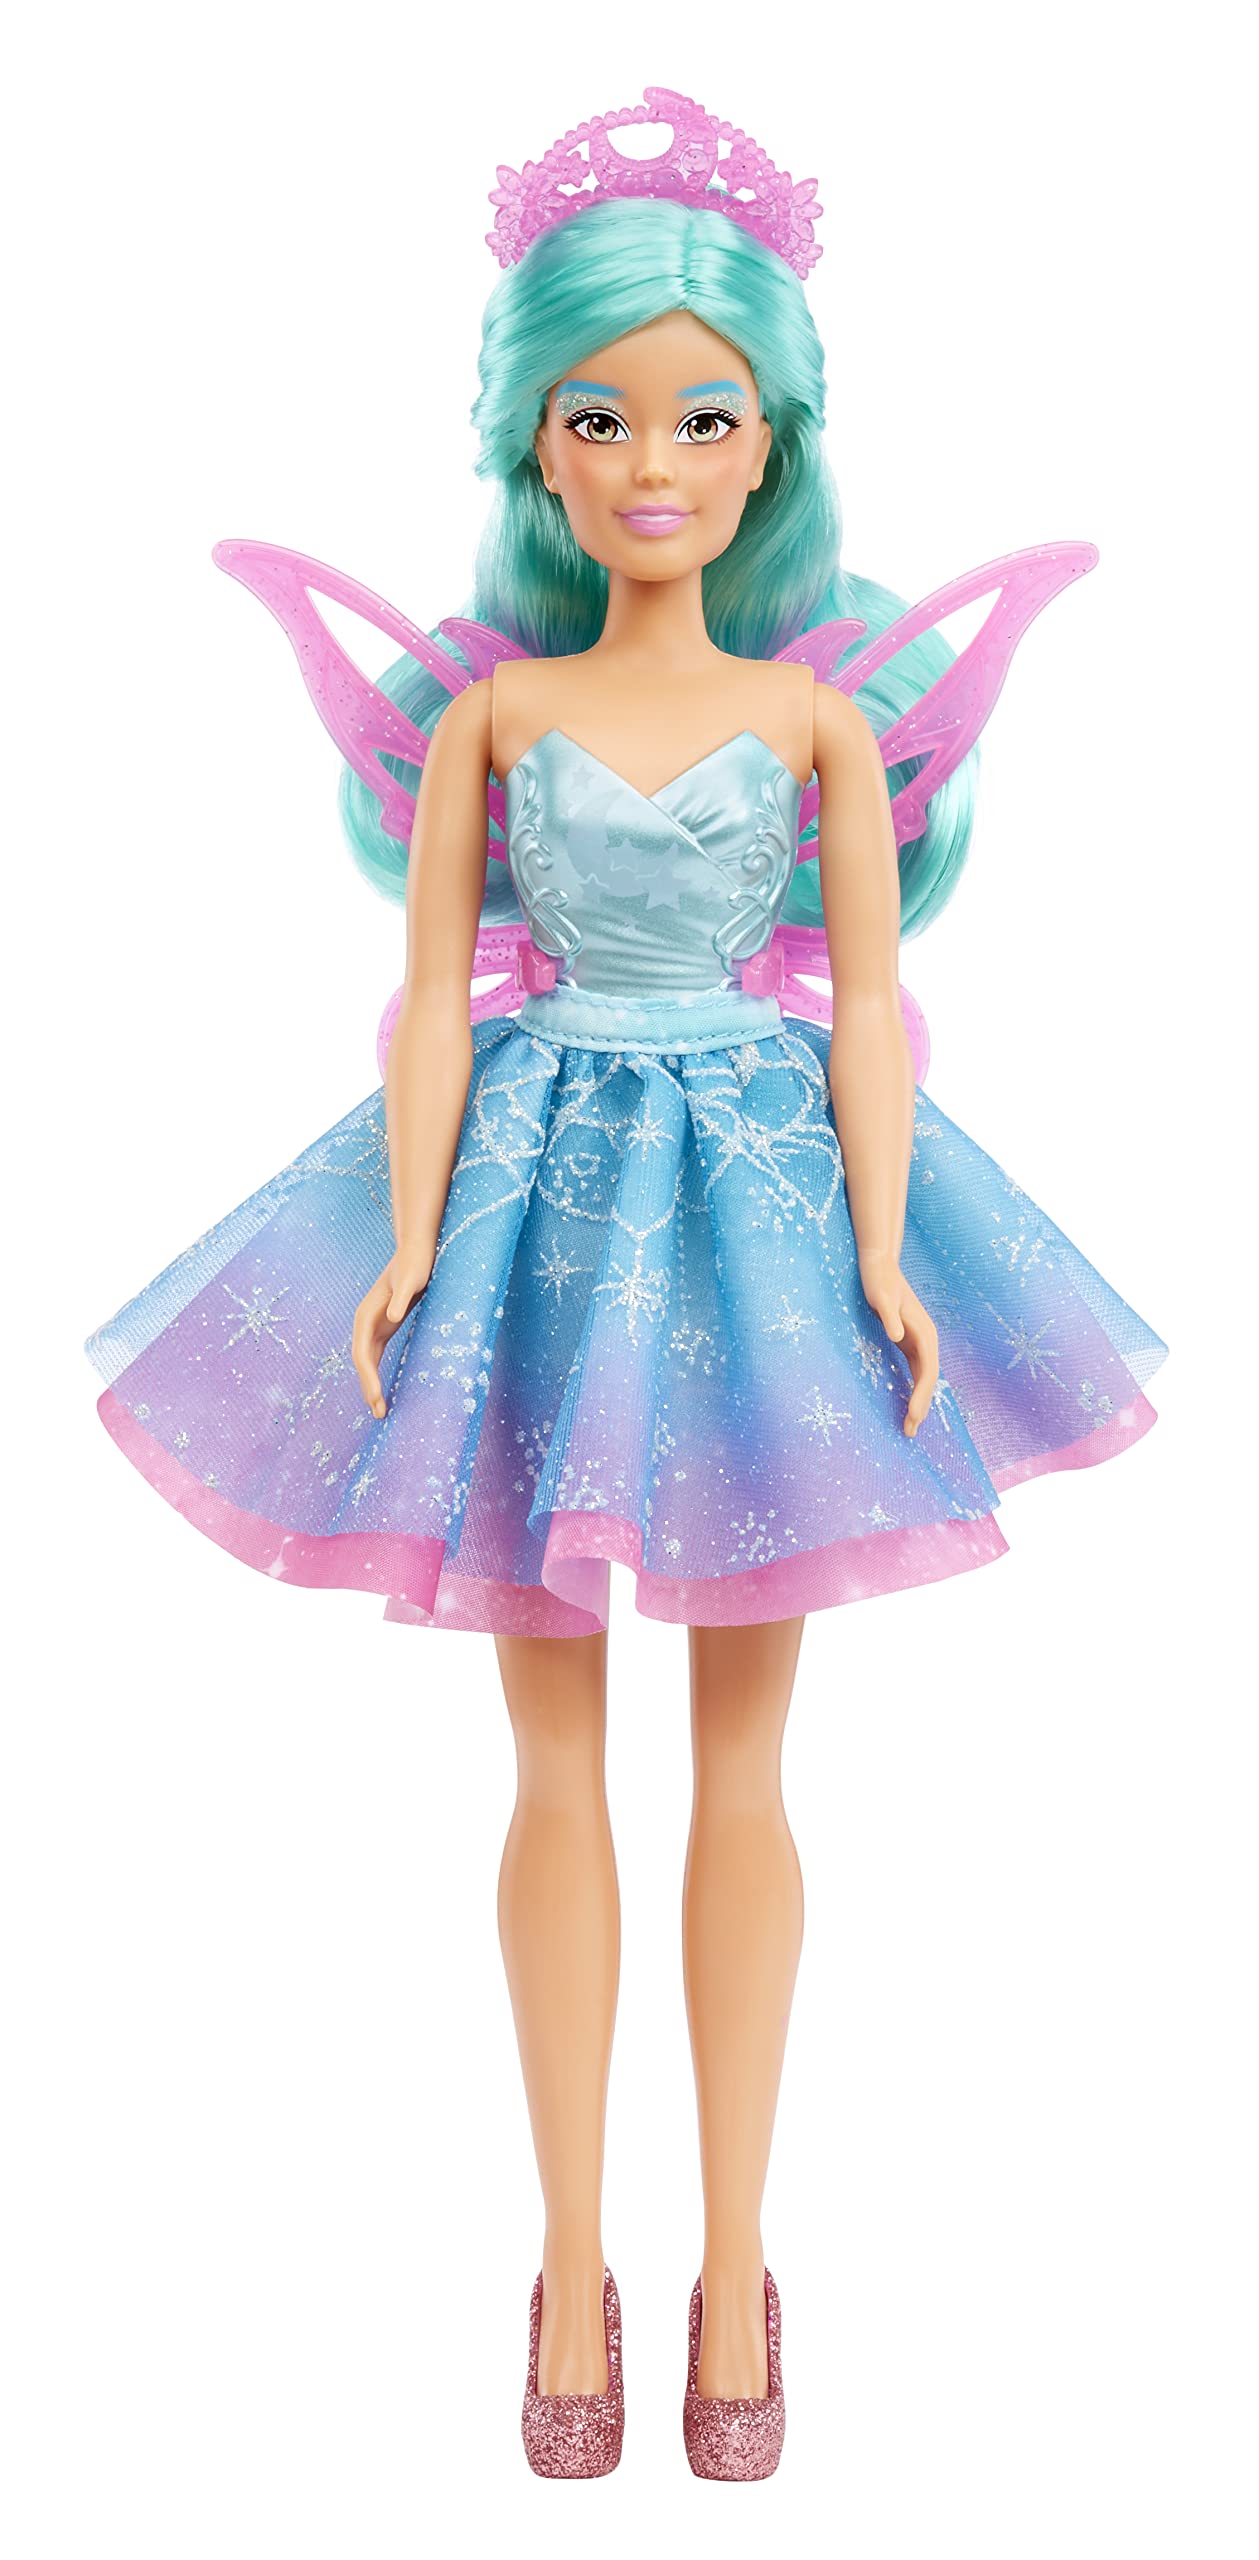 MGA Entertainment Dream Ella Color Change Surprise Fairies Celestial Series Doll - Aria, Star Inspired Fairy Fashion Doll with Iridescent Sparkly Wings, Tiara & Purple Hair, Multicolor (585114)